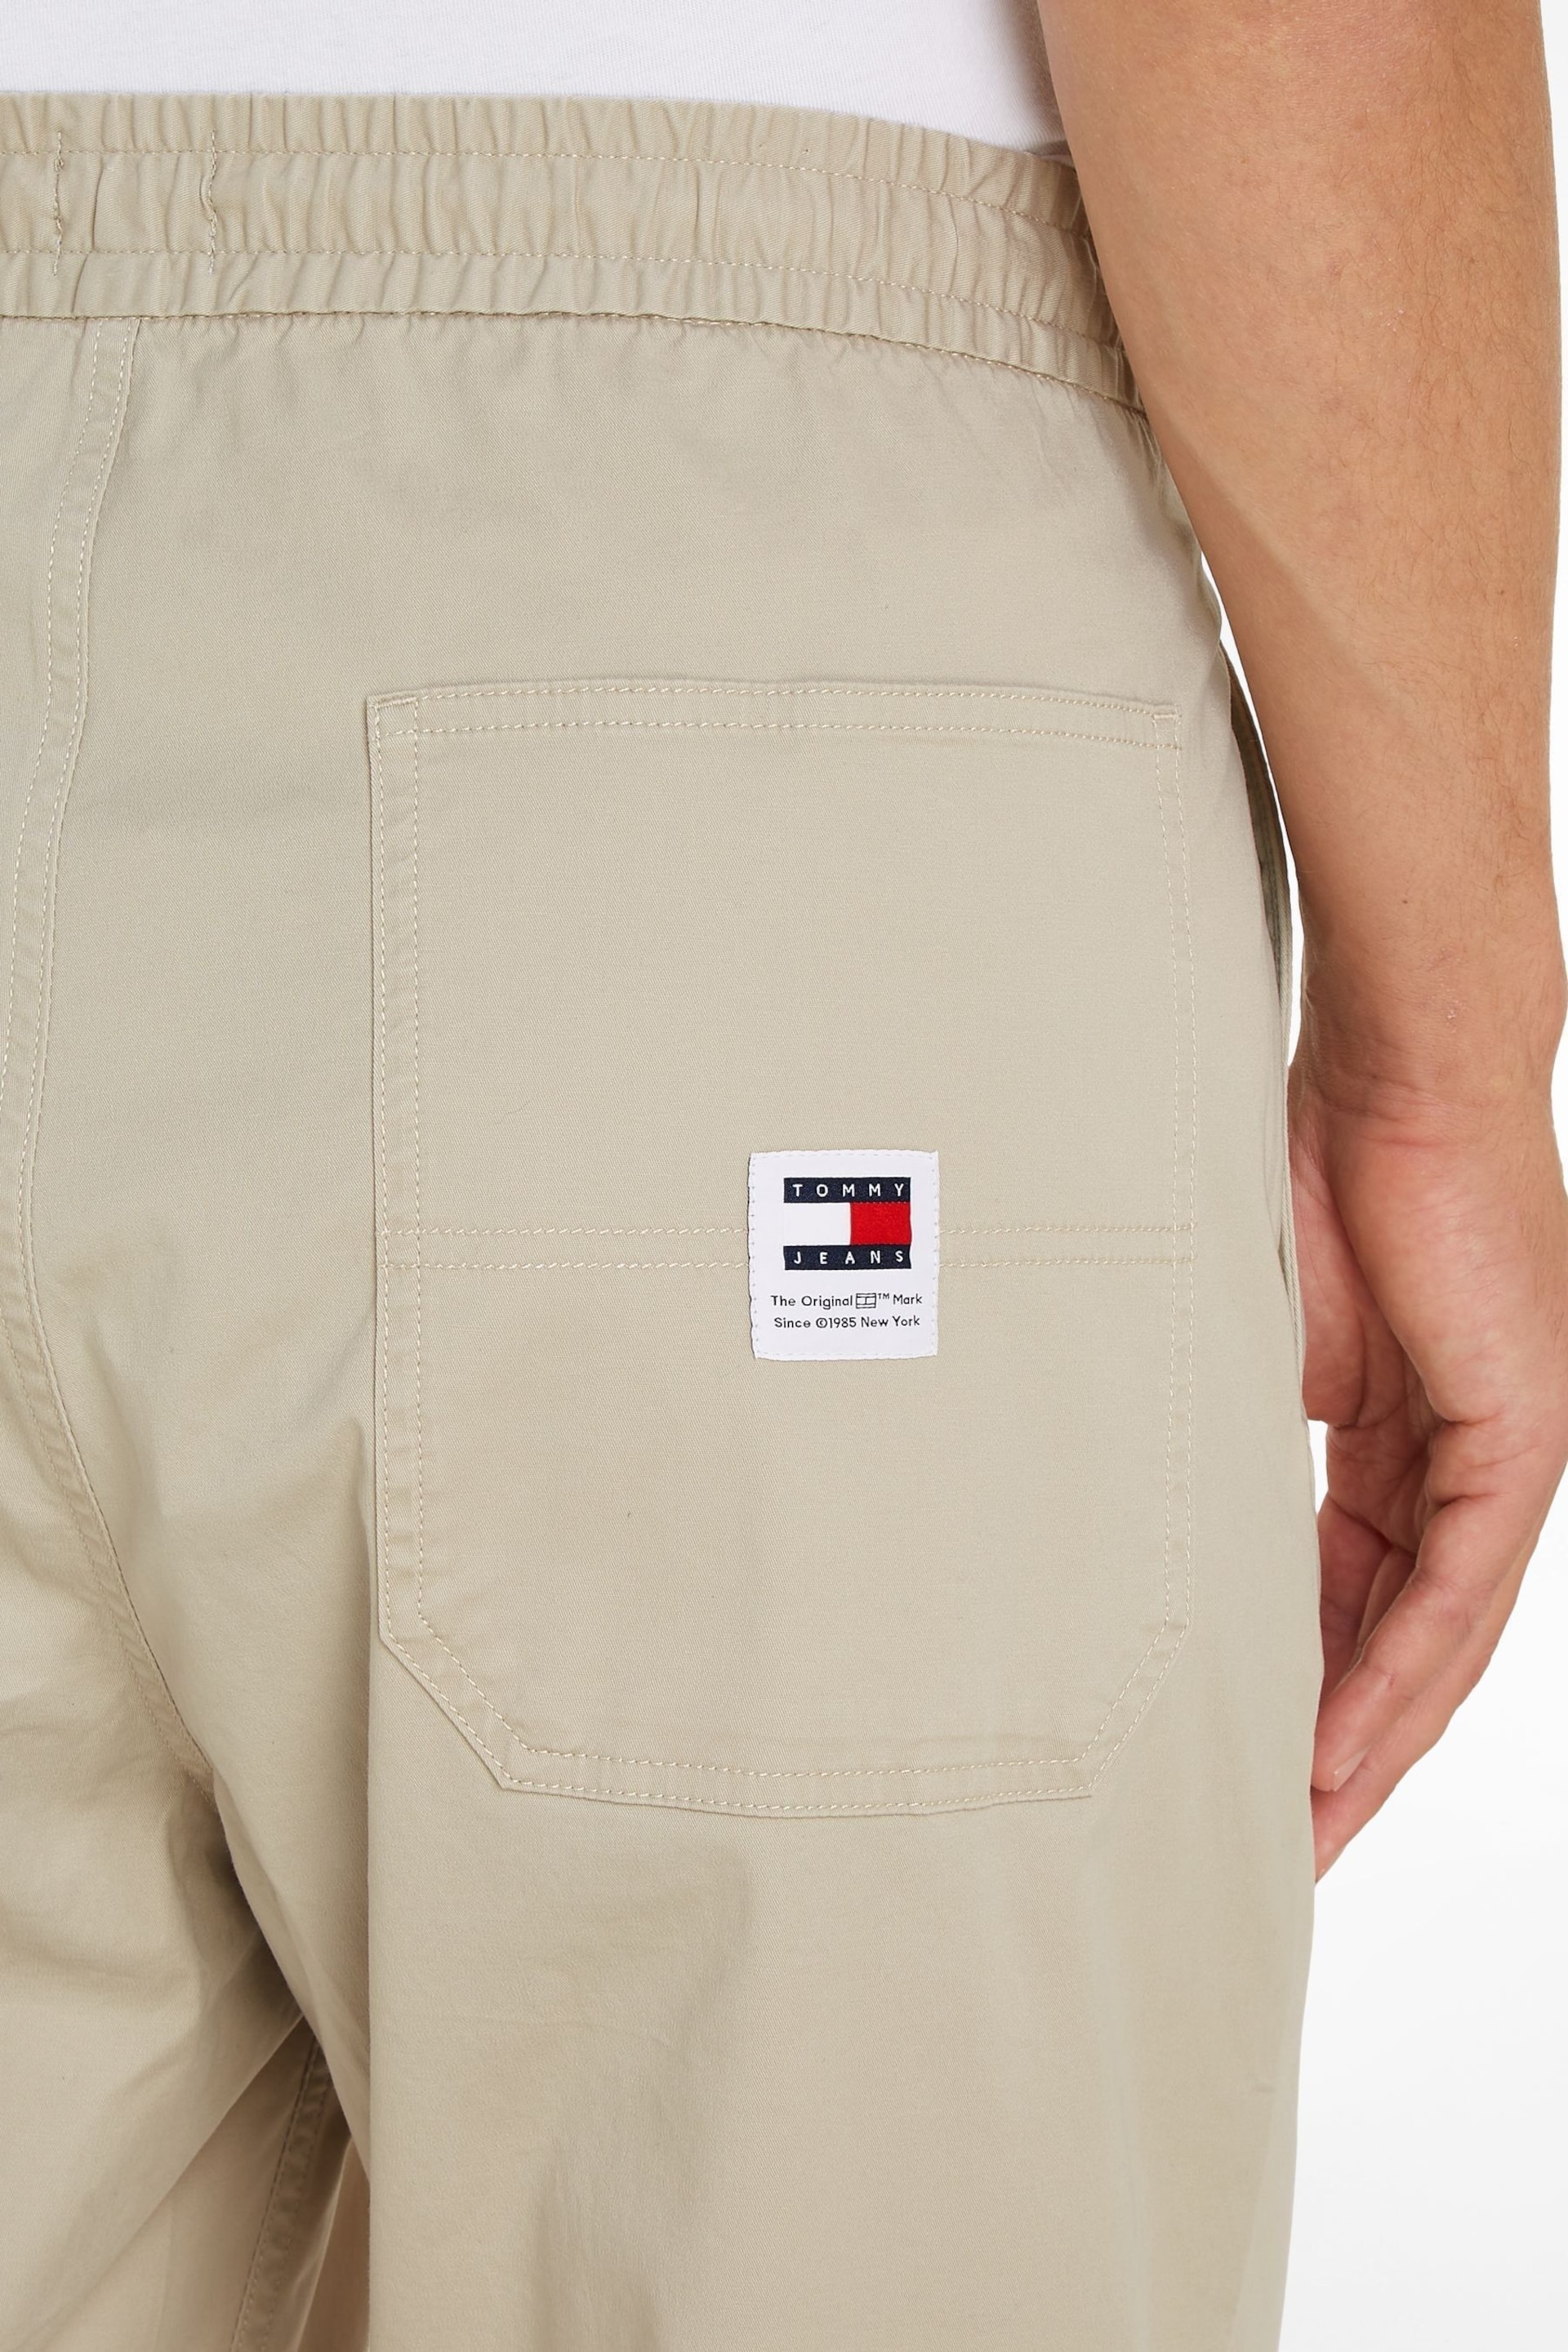 Tommy Jeans Cream Aiden Tapered Trousers - Image 3 of 6